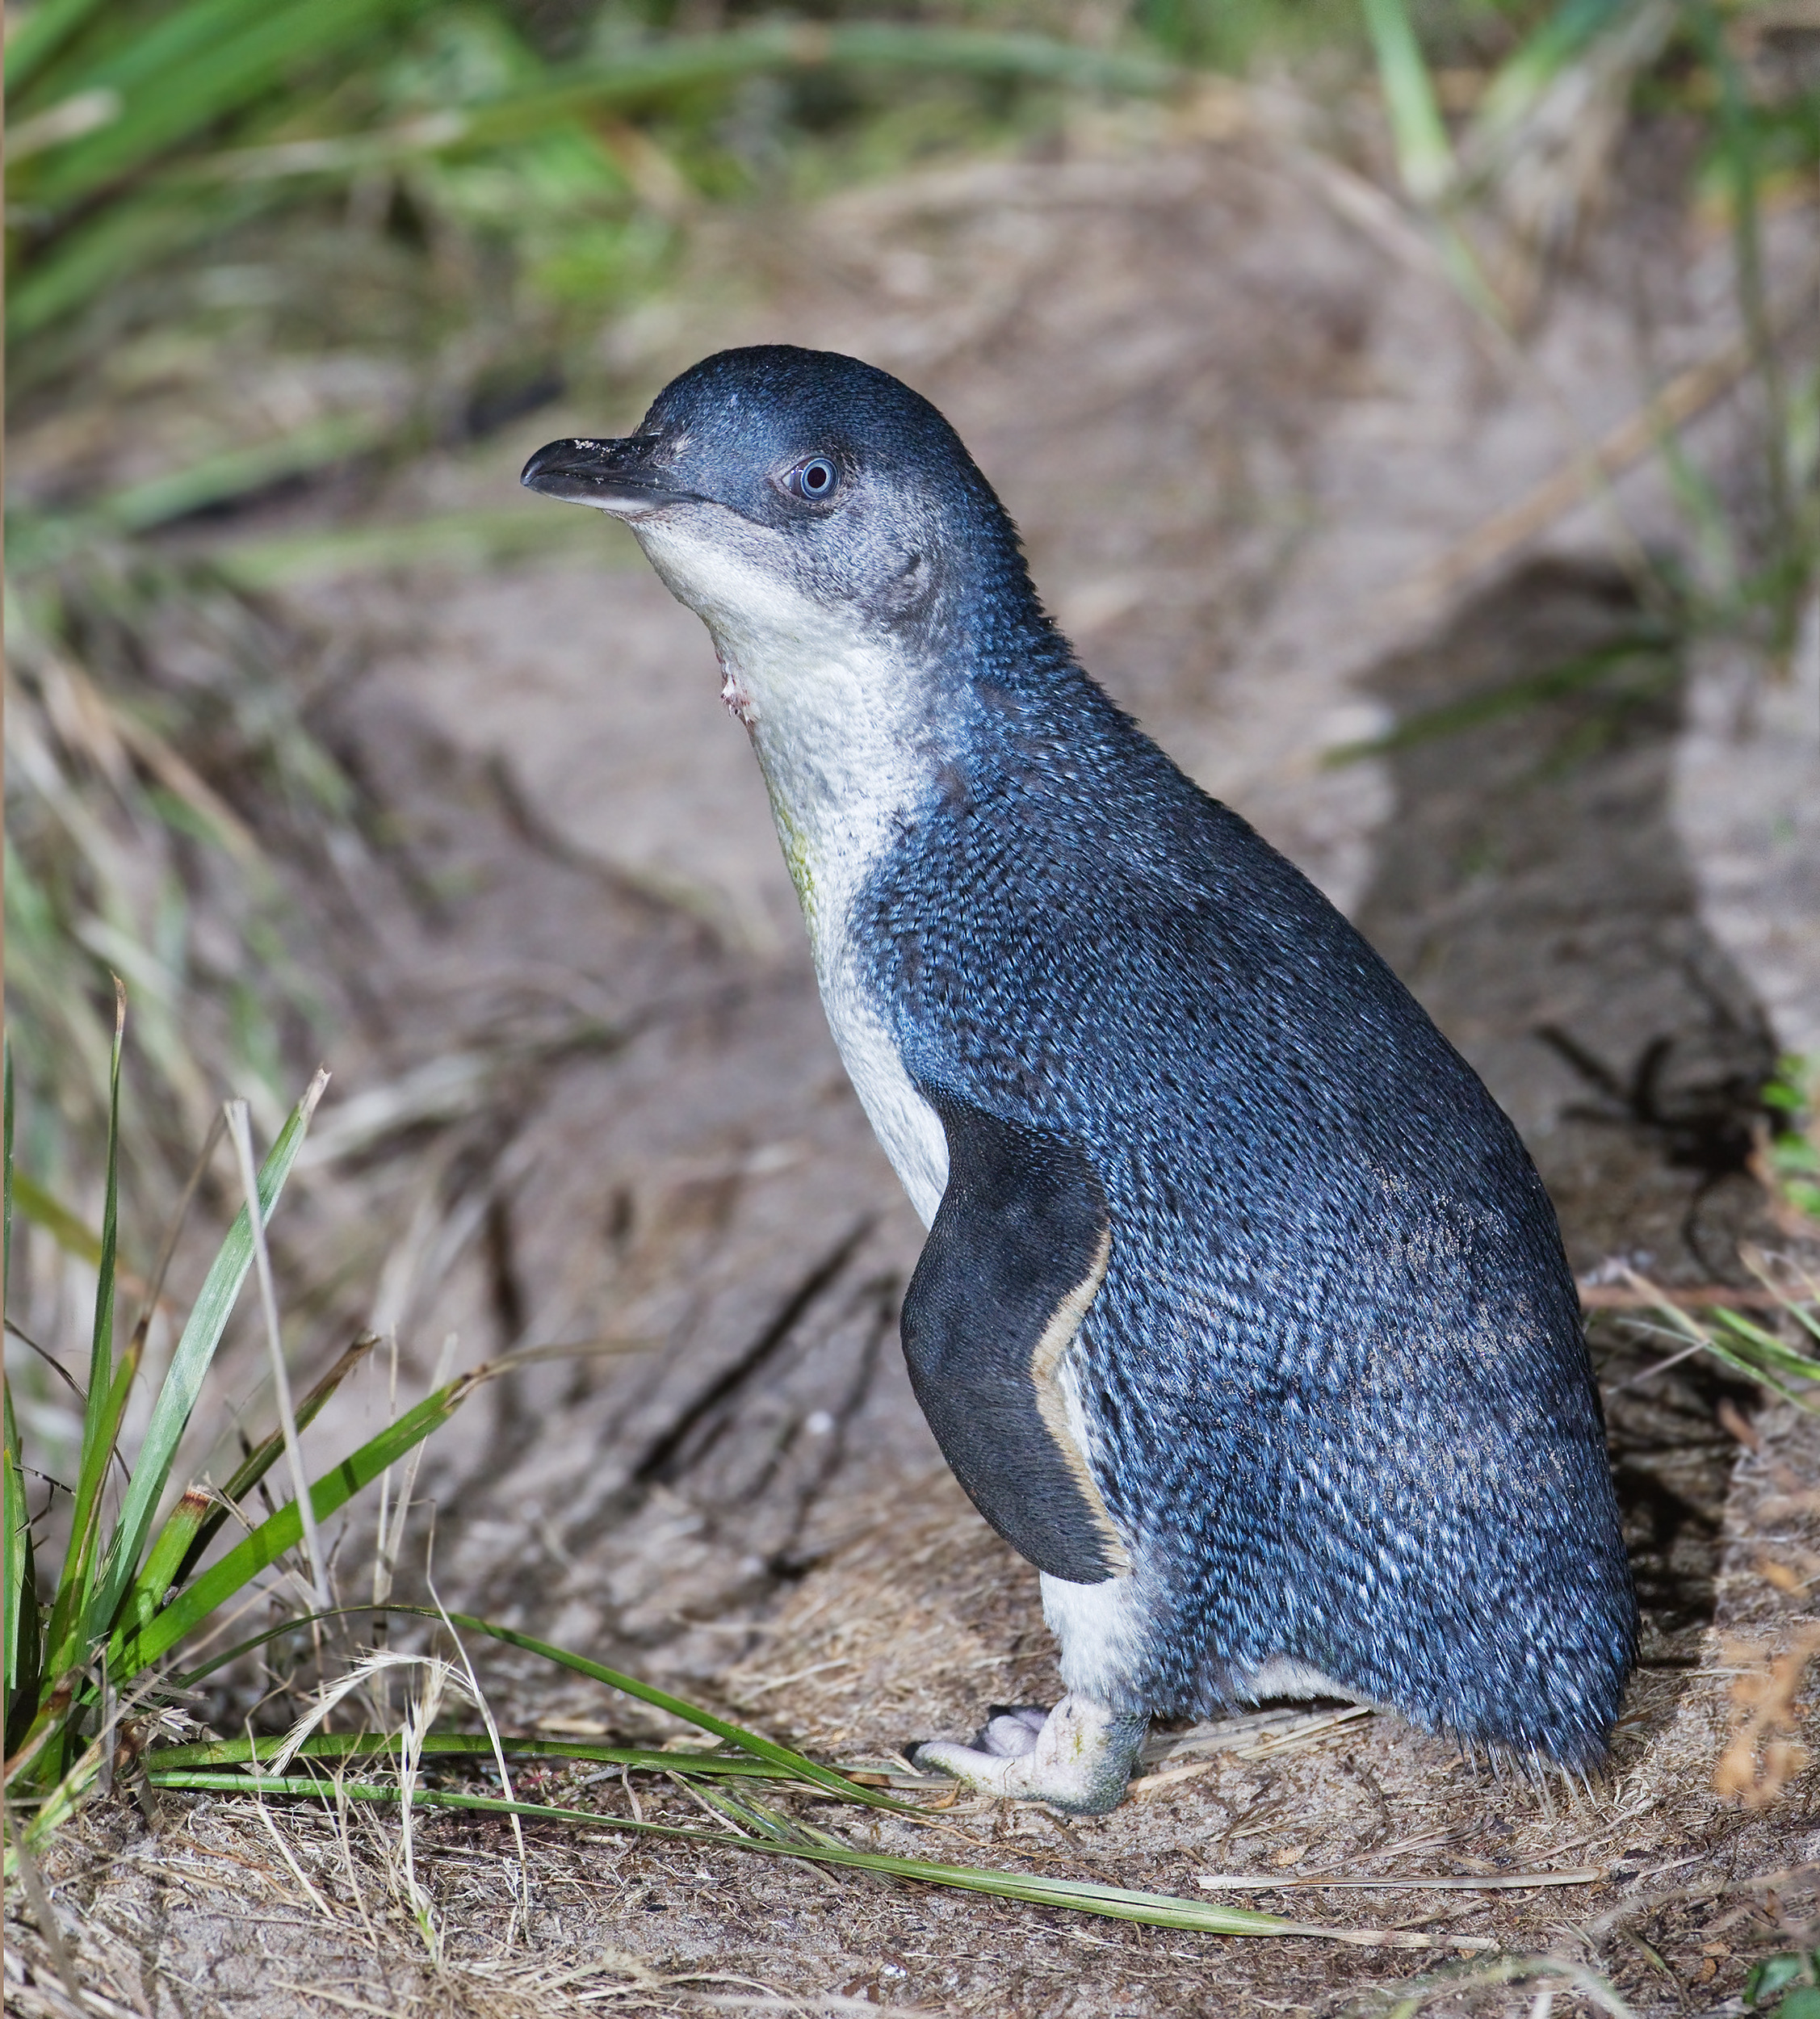 Can I Take Photos of the Penguins on Phillip Island?